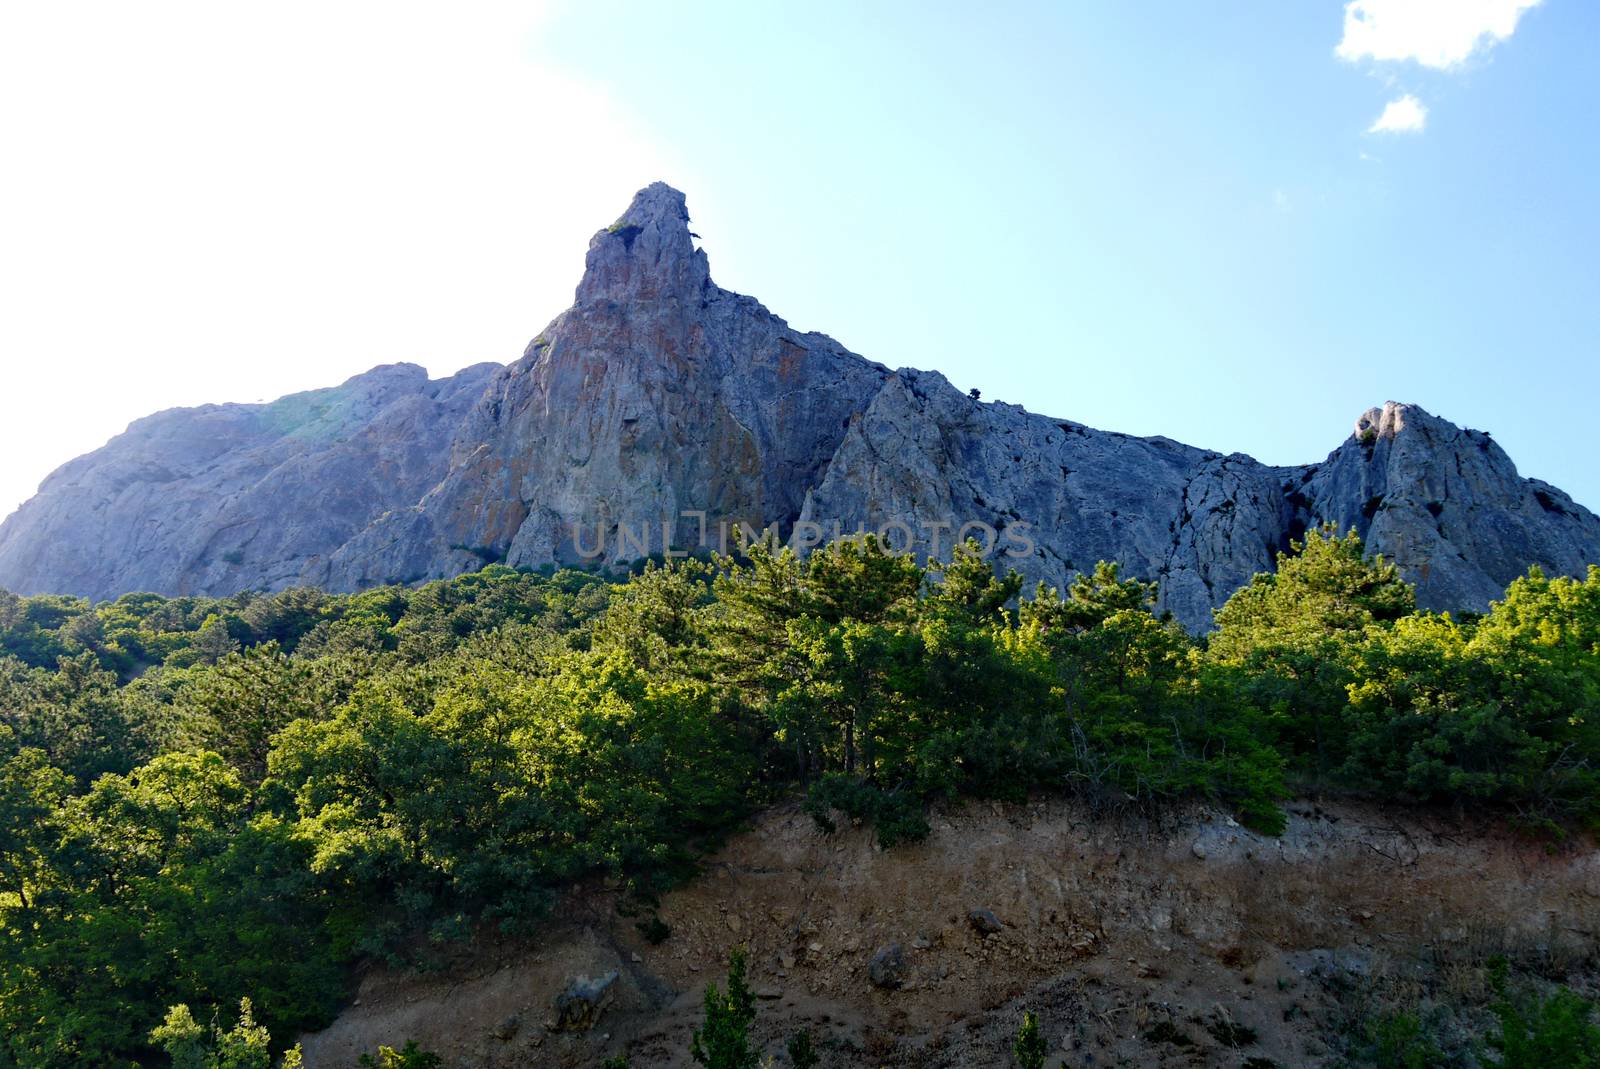 wide dense forest on the background of a steep gray rock under a blue sky by Adamchuk